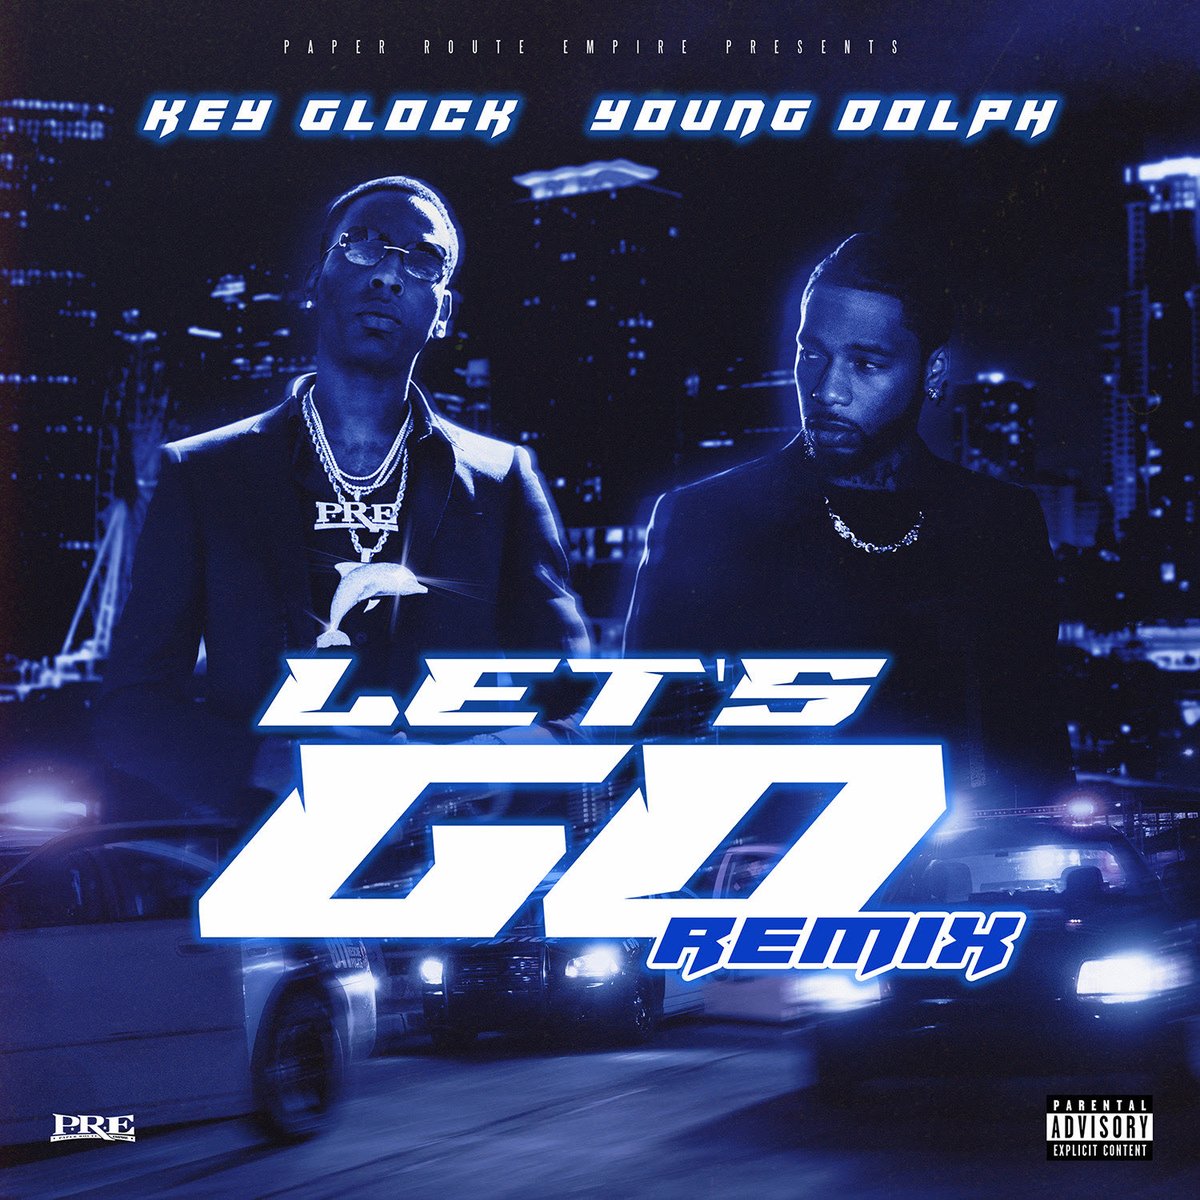 The 'Glockoma 2' standout gets an update. @KeyGLOCK remixes his slapper “Let’s Go” with a new verse from @YoungDolph. tinyurl.com/yck86fcr